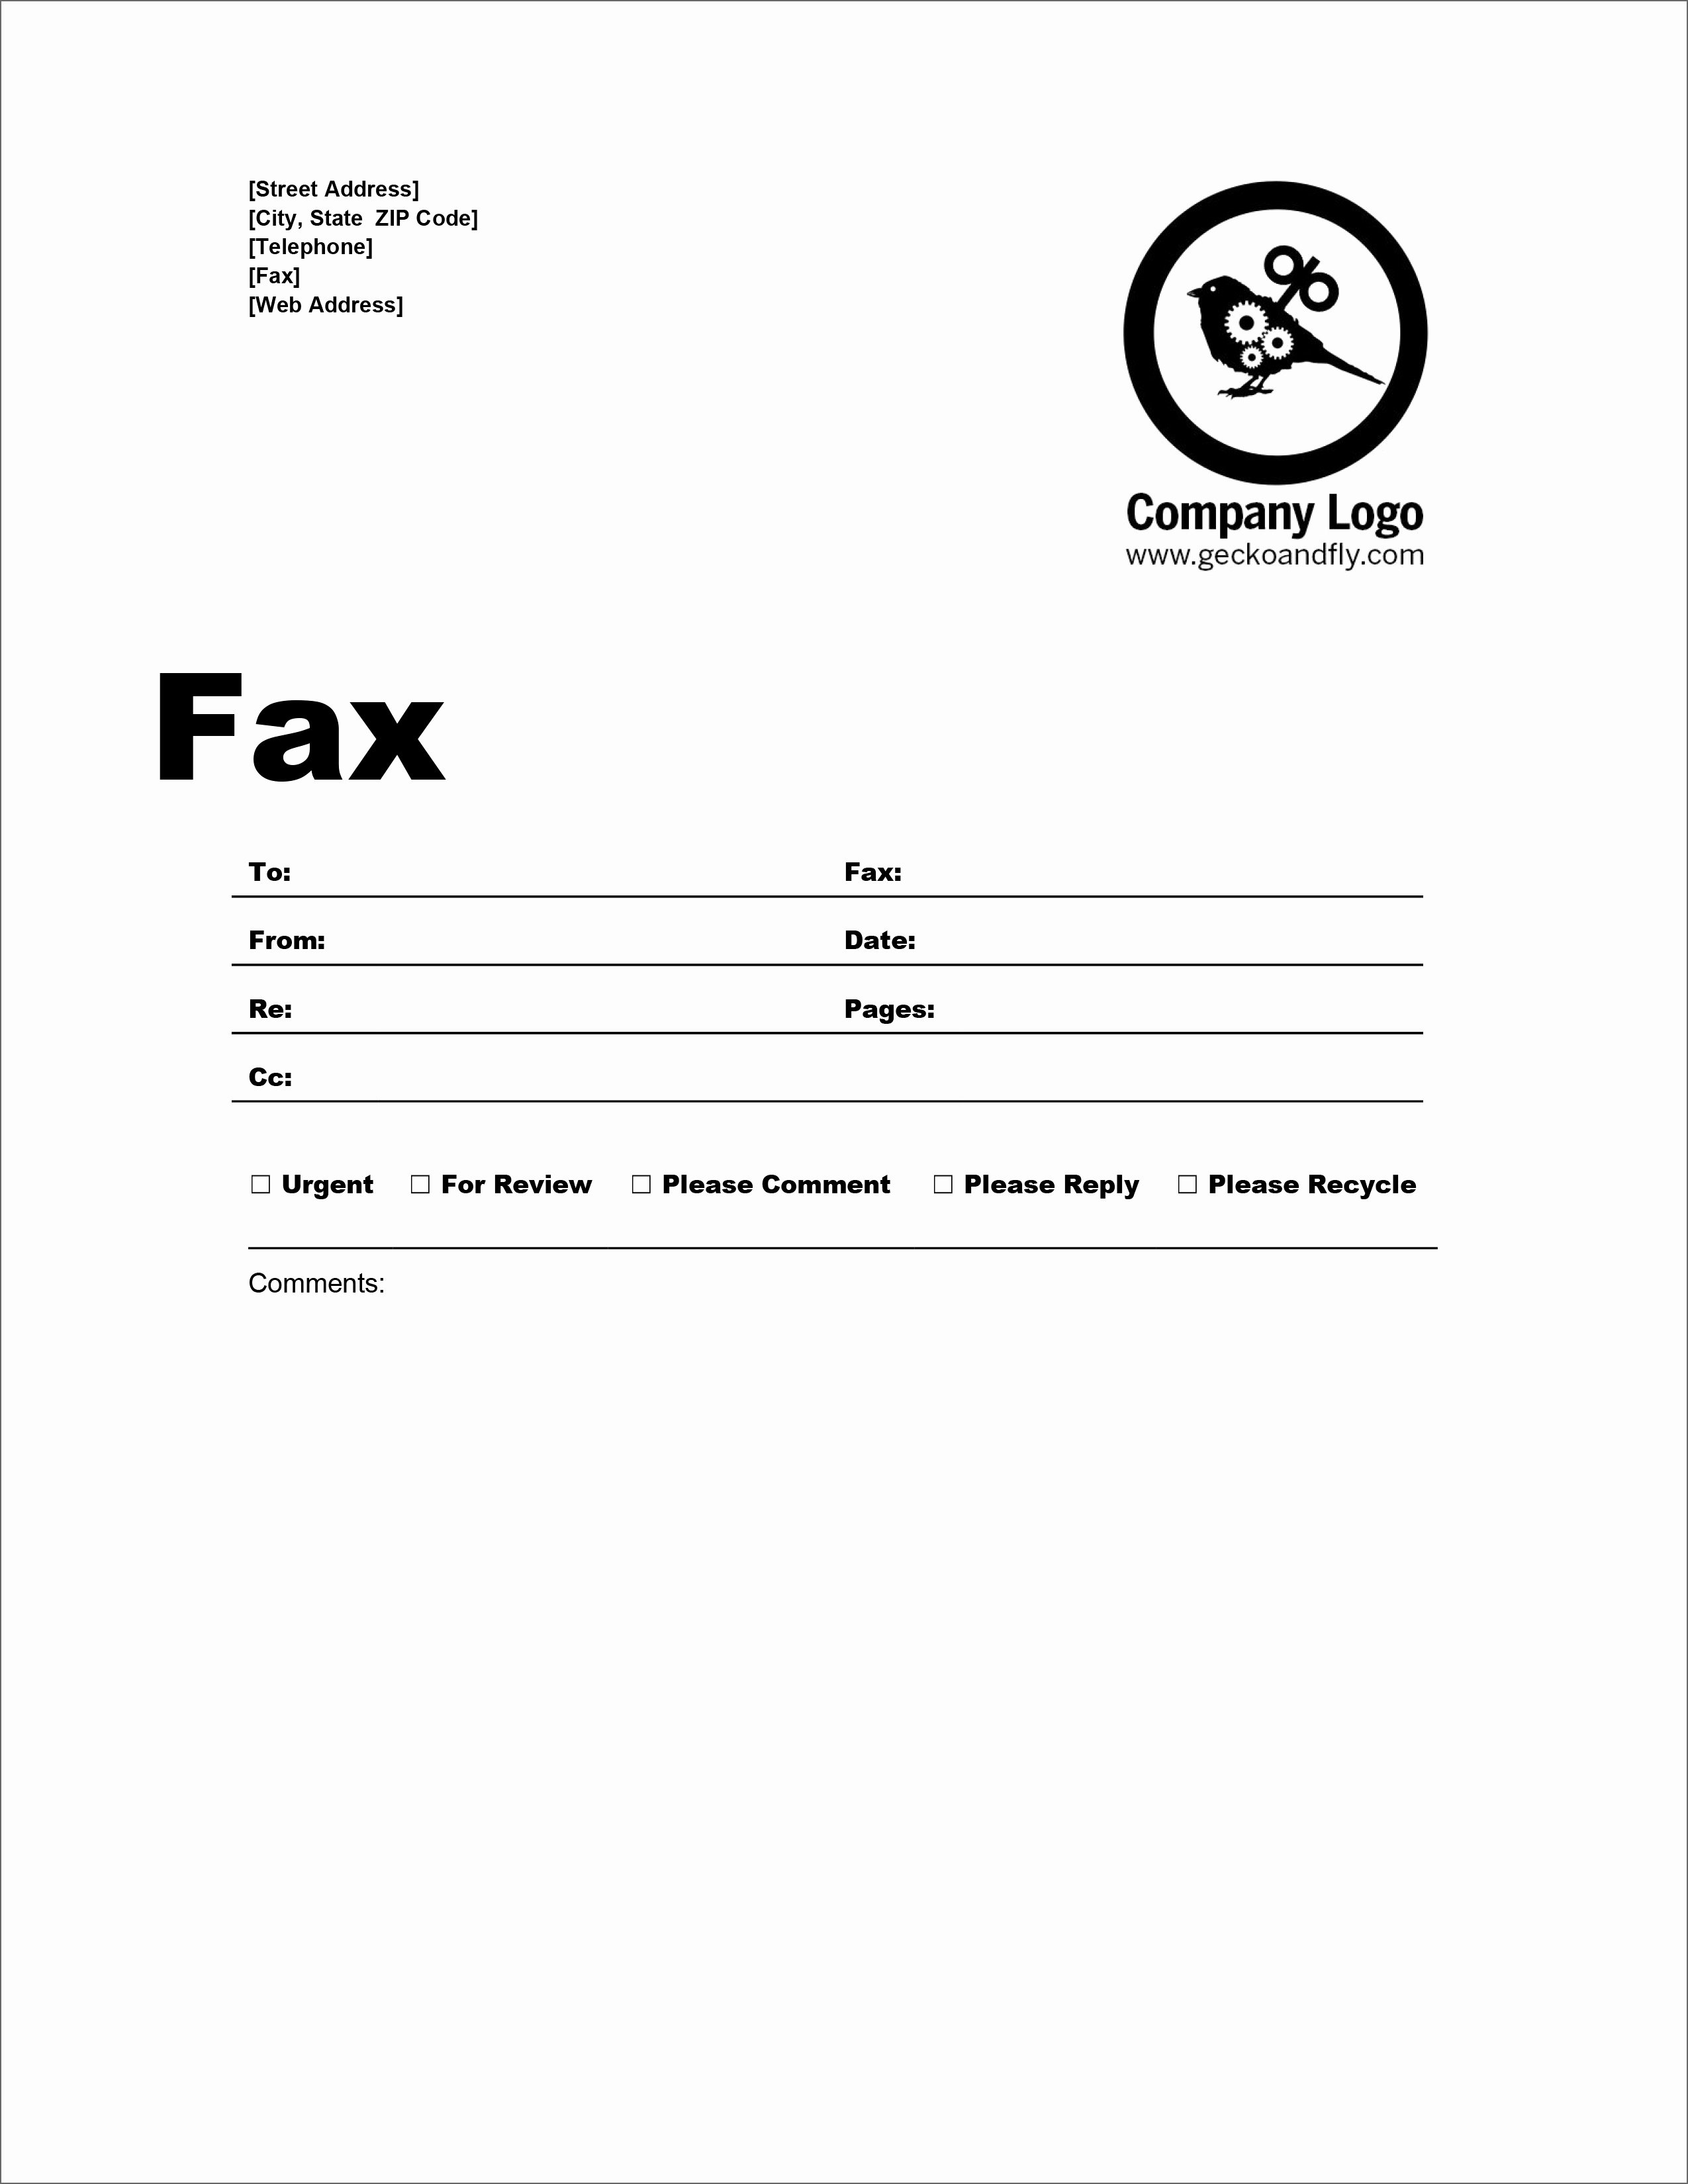 Fax Cover Sheet Template Word Lovely 20 Free Fax Cover Templates Sheets In Microsoft Fice Docx